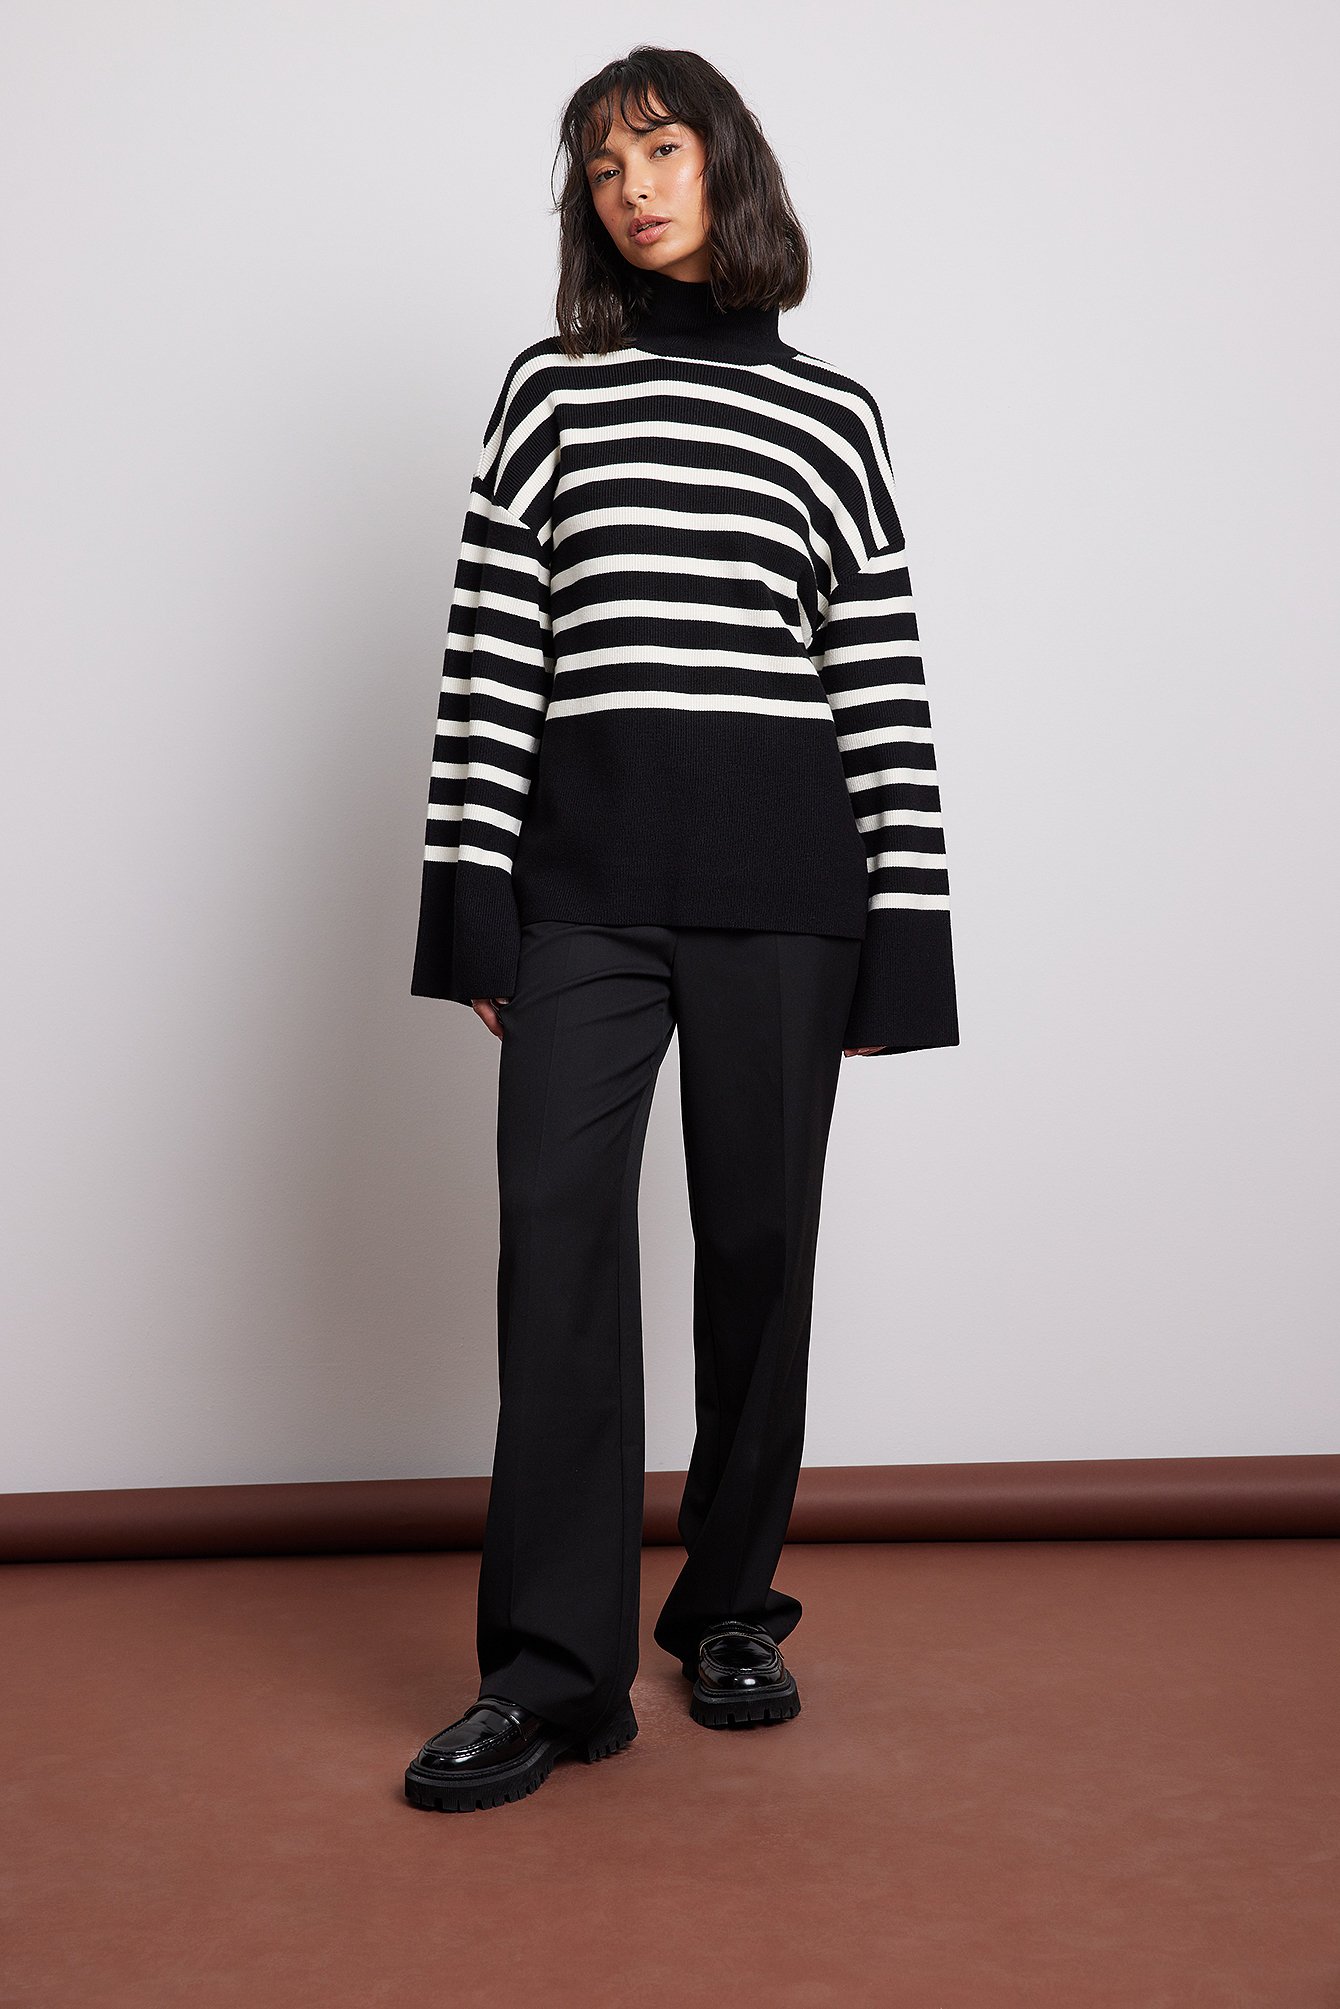 Striped Turtle Neck Knitted Sweater Outfit